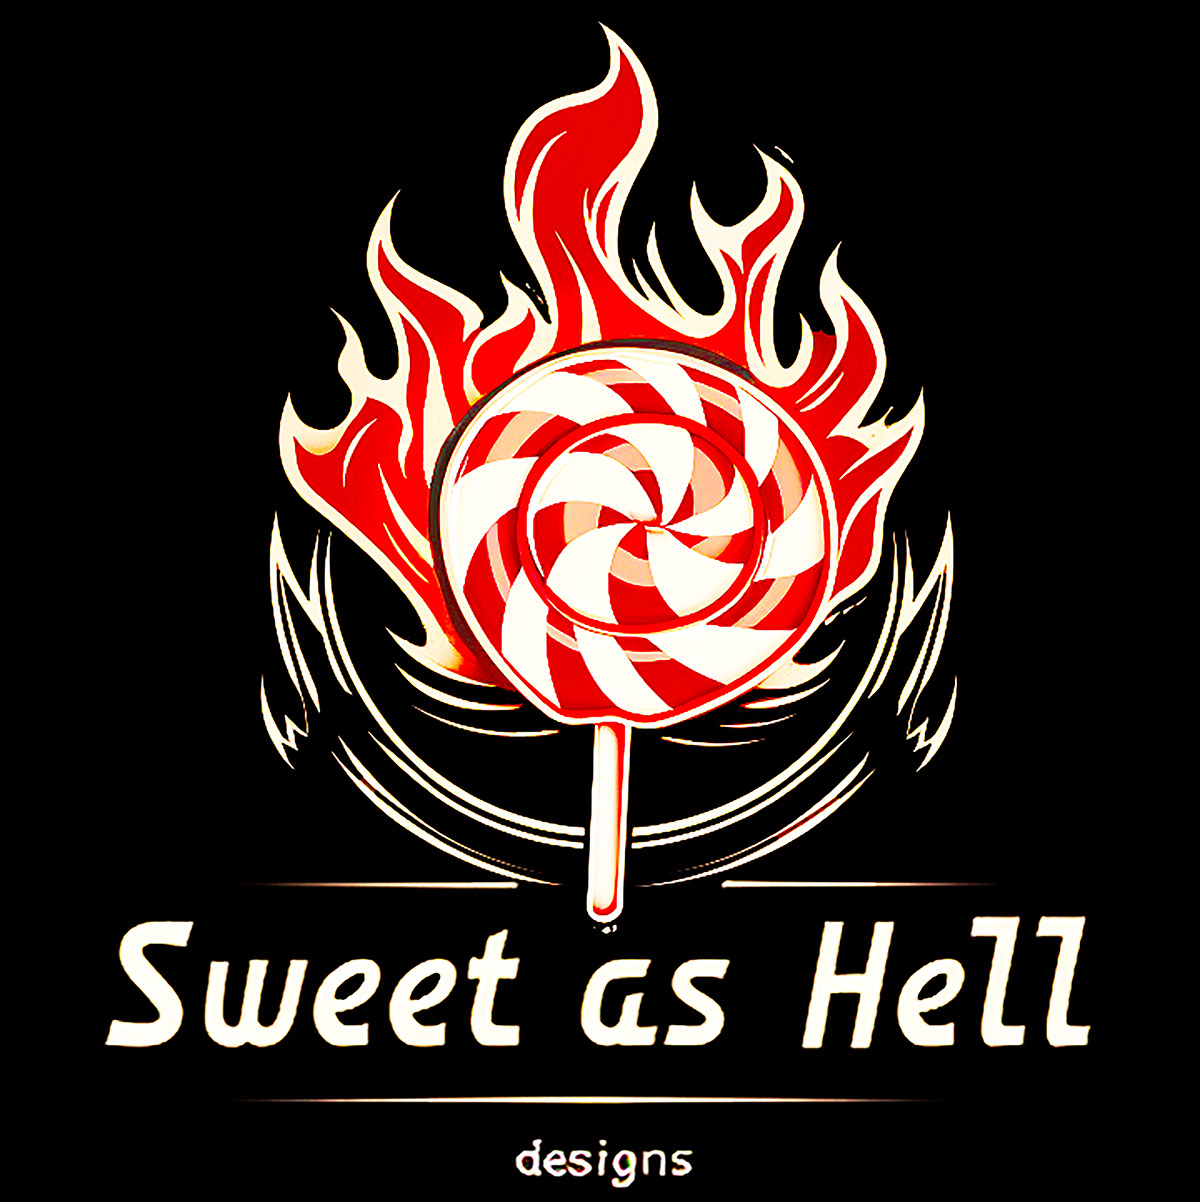 Sweet_As_Hell_Designs_Licensable_Ruffian_no_13 rendition image